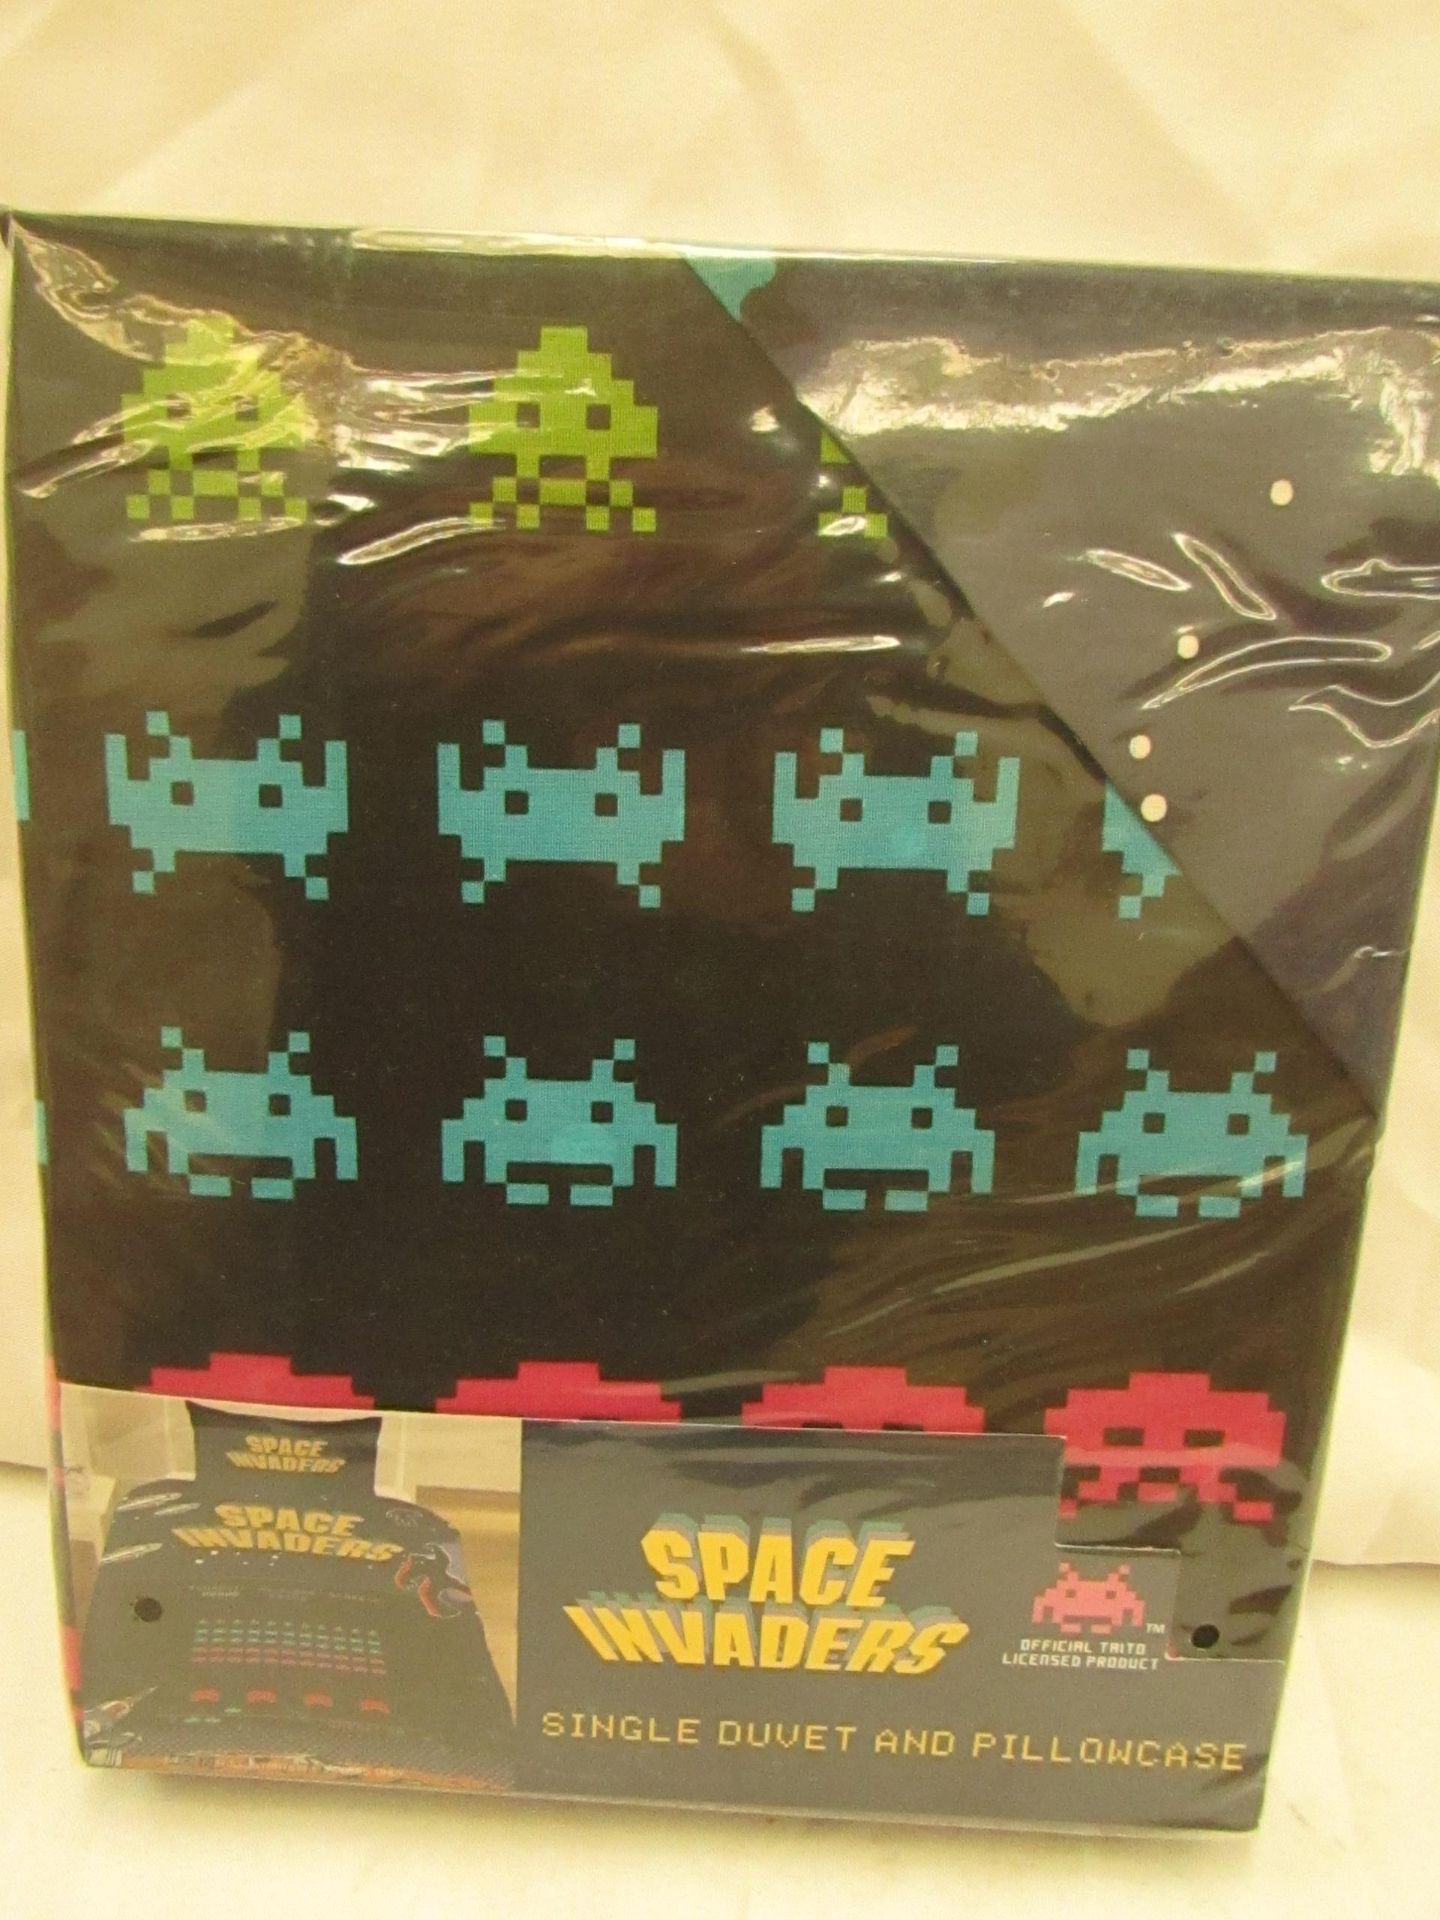 Space Invaders - Single Duvet & Pillowcase Set - New & Packaged.